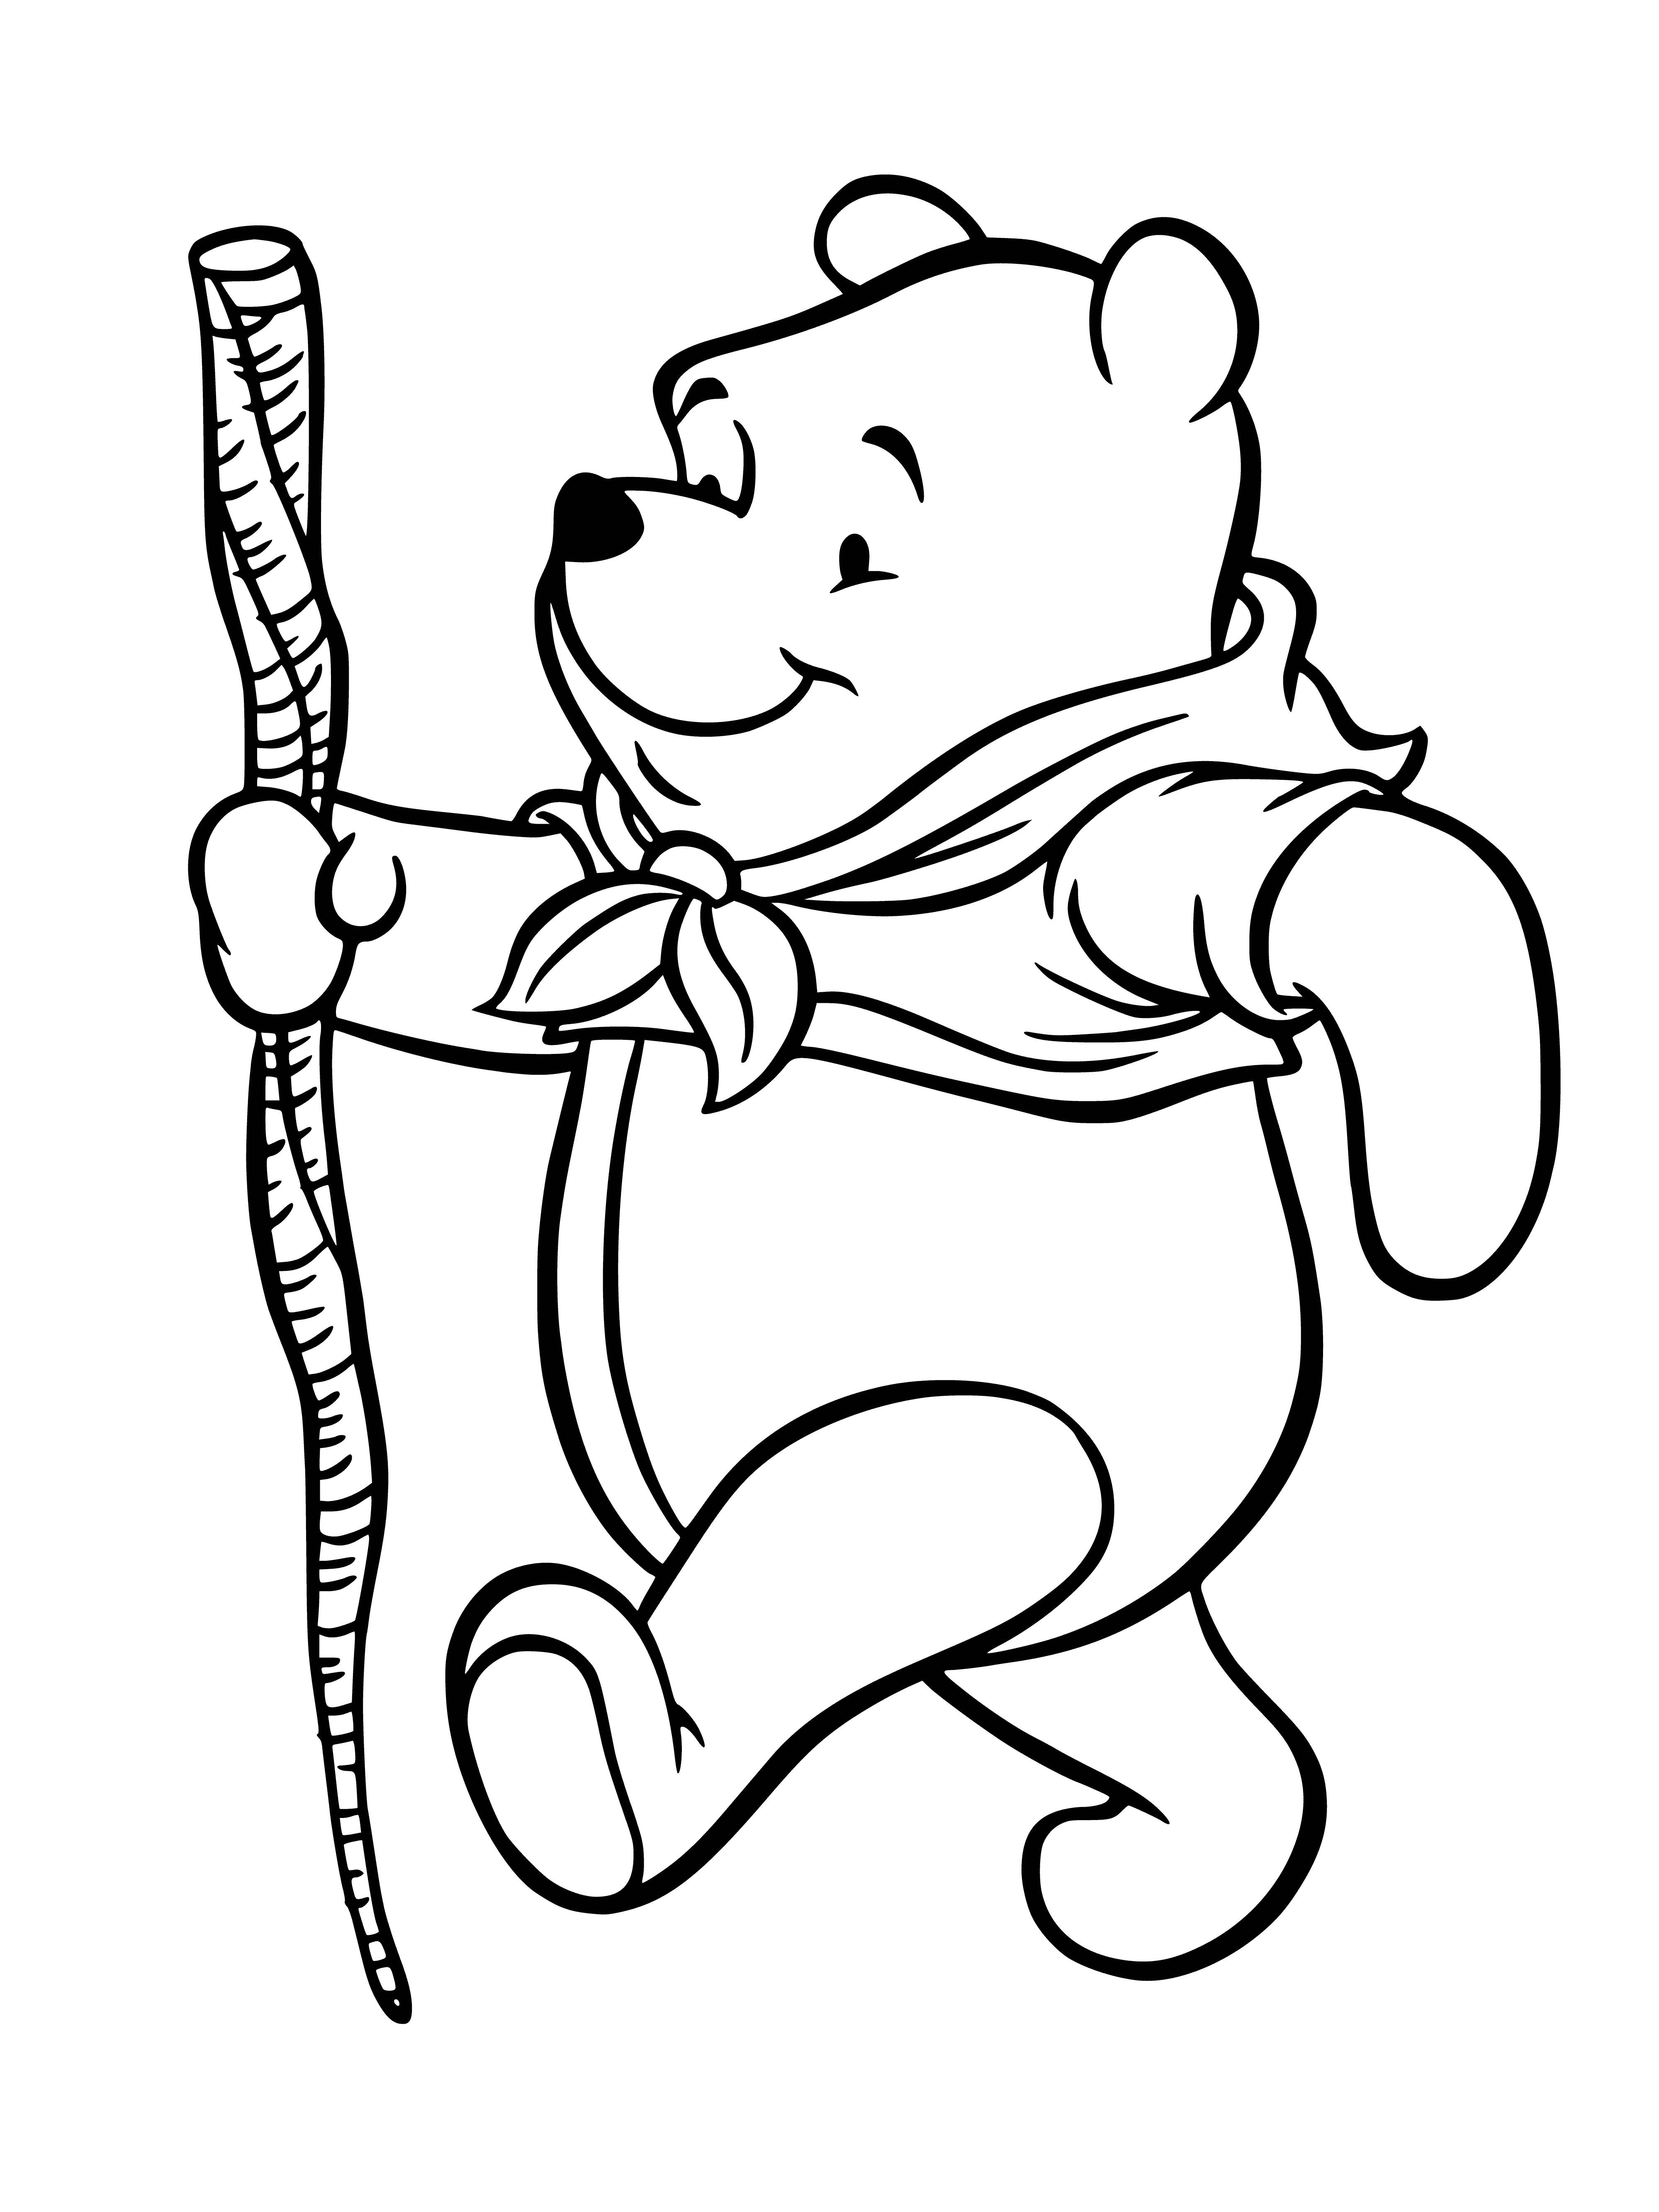 Excited vinnie coloring page